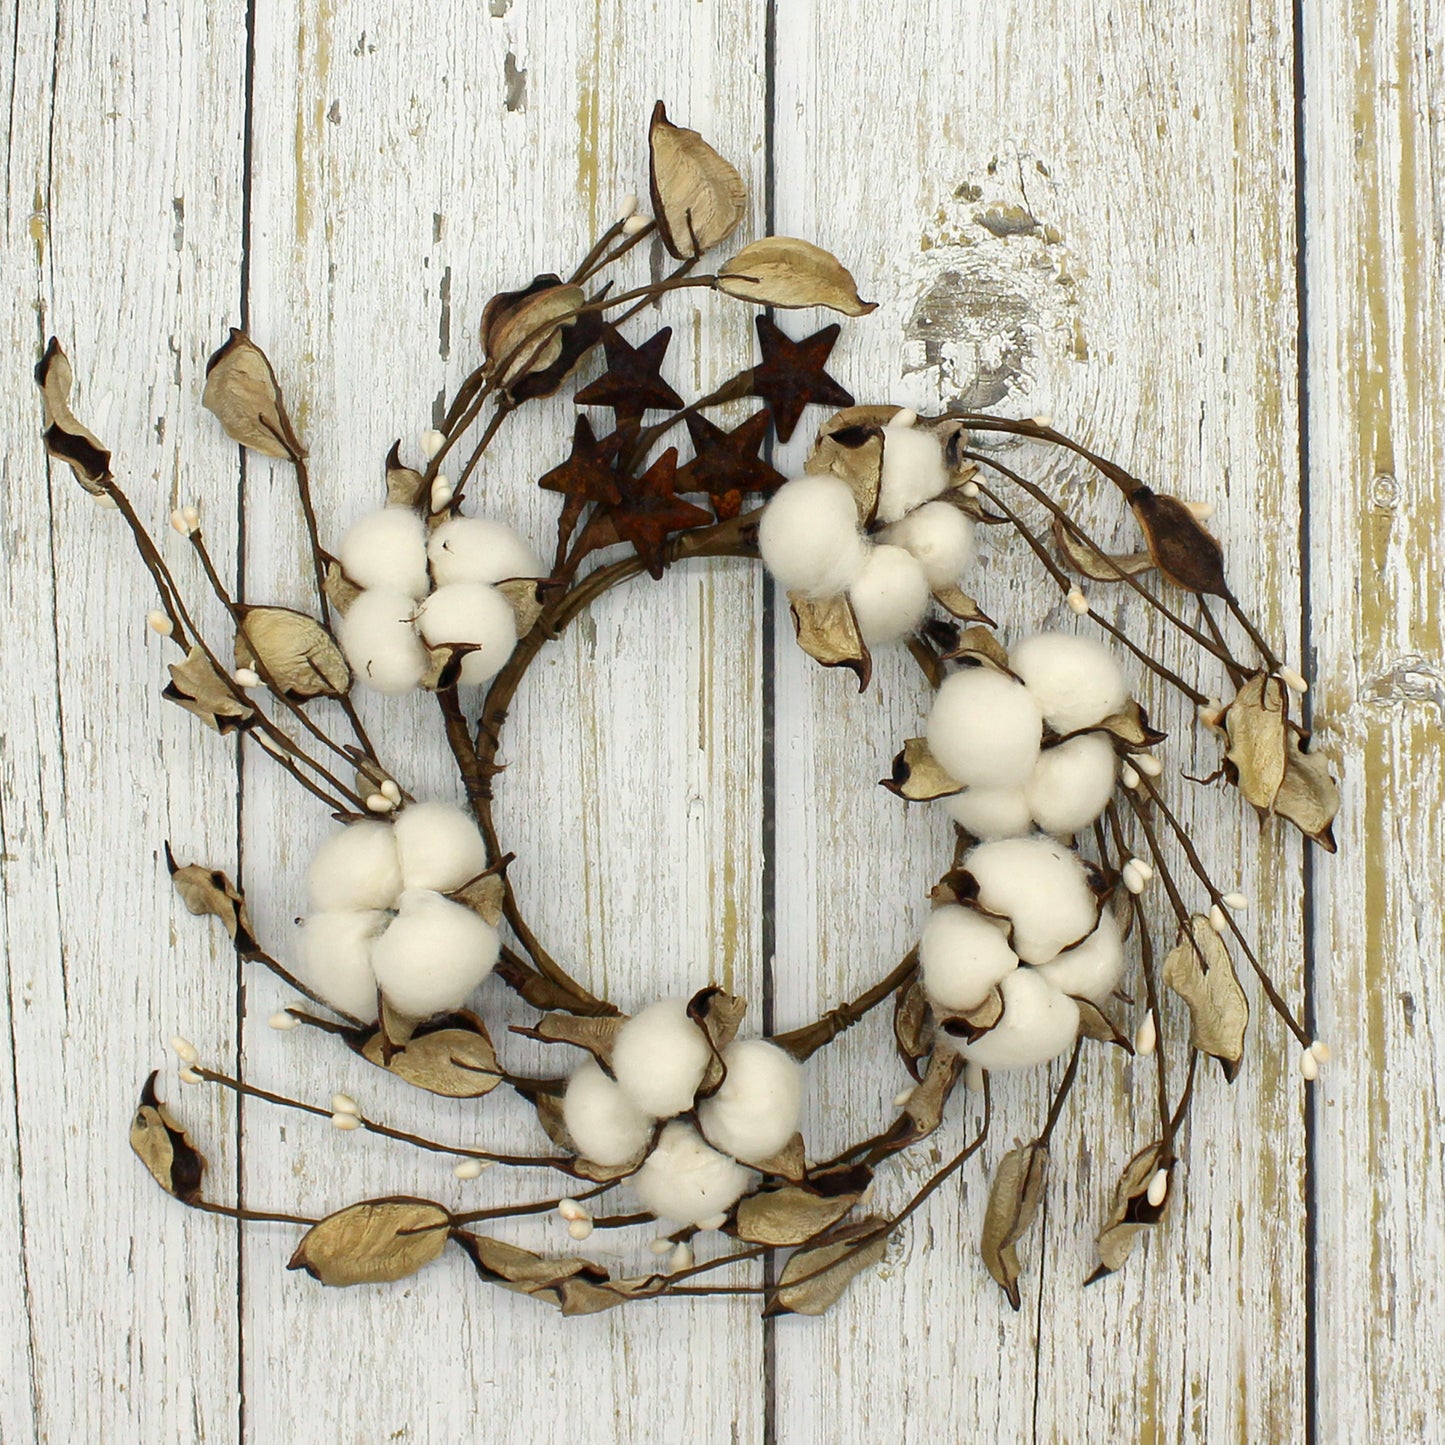 CVHOMEDECO. Primitives Rustic Cotton Pod Pip Berries and Autumn Leaves with Rusty Barn Stars Wreath, 12 Inch